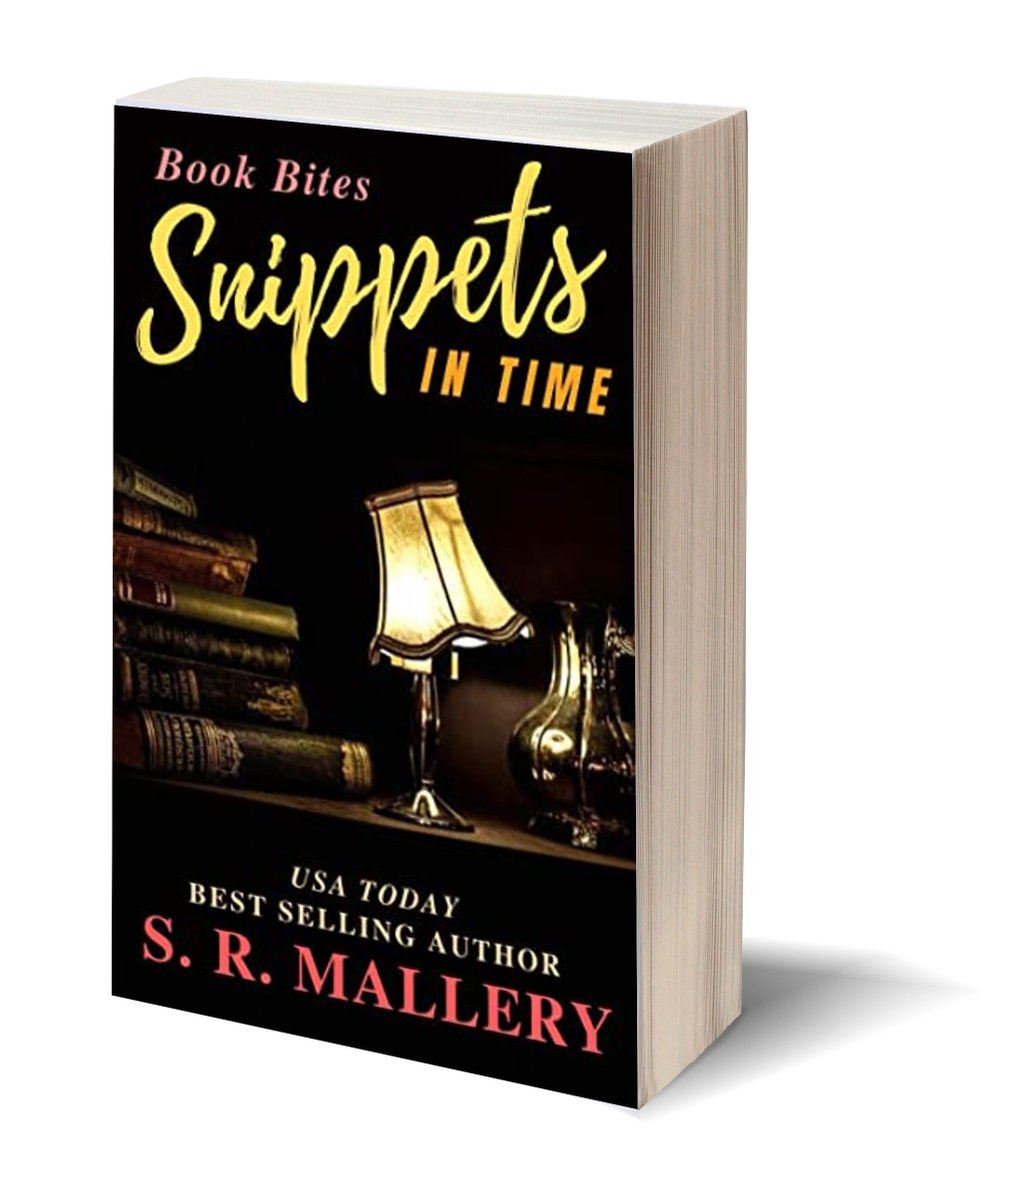 Drift back in time with award-winning author S. R. Mallery
SNIPPETS IN TIME
amzn.to/2WElf0D
wp.me/P5rIsN-3IY
@SarahMallery1
#IARTG #QuickReads #wowbooks
Pizzazz Promotions wp.me/P5rIsN-Ft 
   3